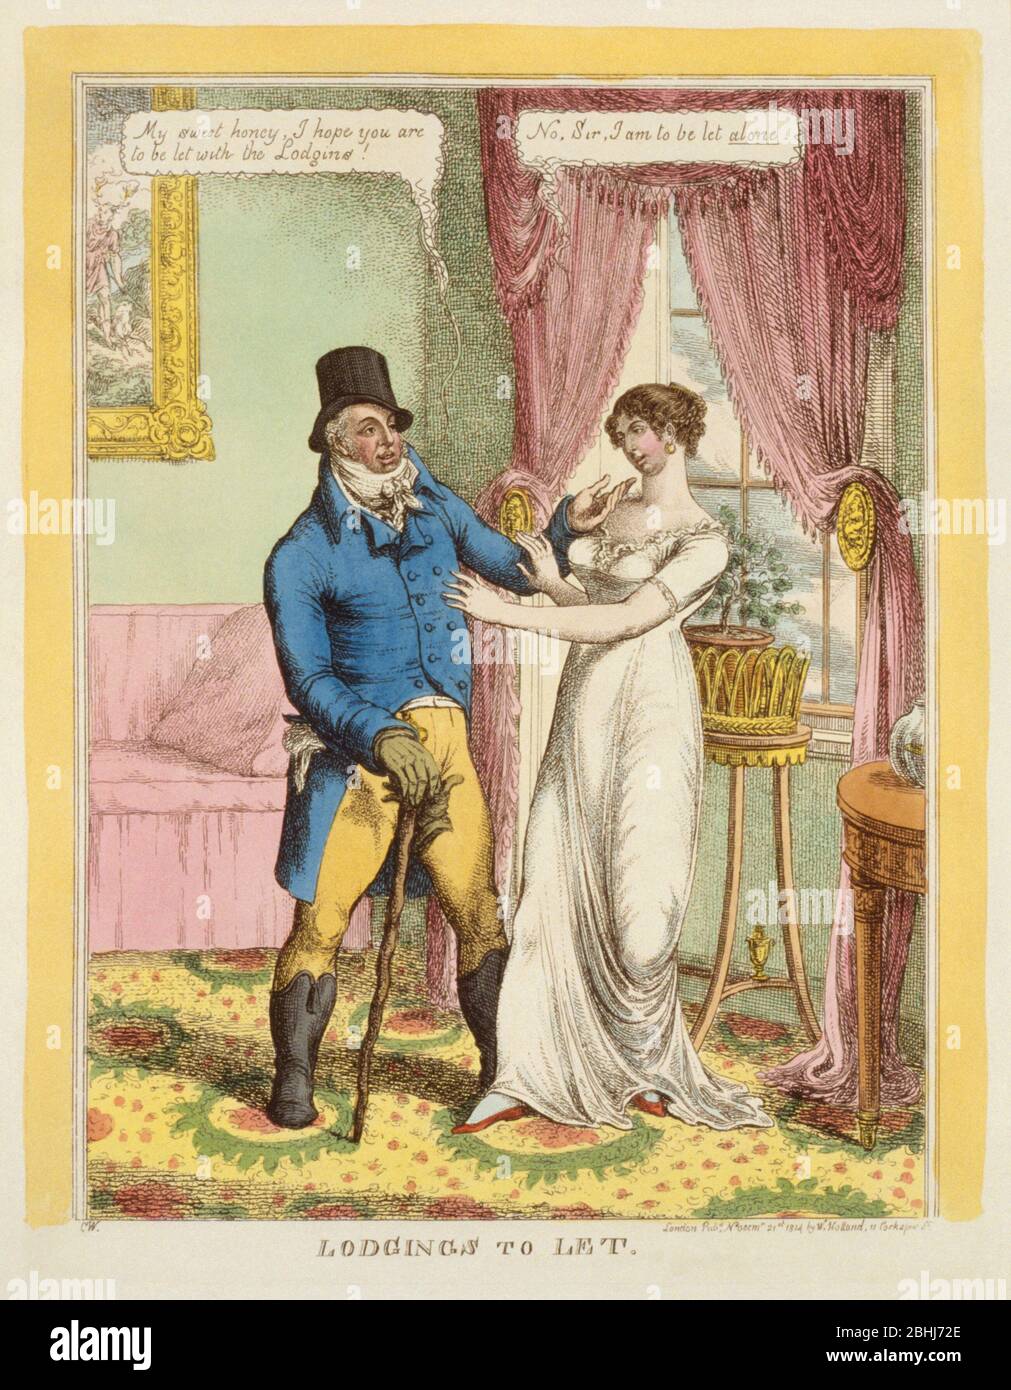 Lodgings to Let, an 1814 engraving featuring a double entendre. He: 'My sweet honey, I hope you are to be let with the Lodgins!' She: 'No, sir, I am to be let alone'.  A fashionably dressed man standing in a well-furnished sitting-room, speaking to a pretty and elegant young woman. He wears a tophat, Hessian boots, and carries a large rough walking-stick. Stock Photo